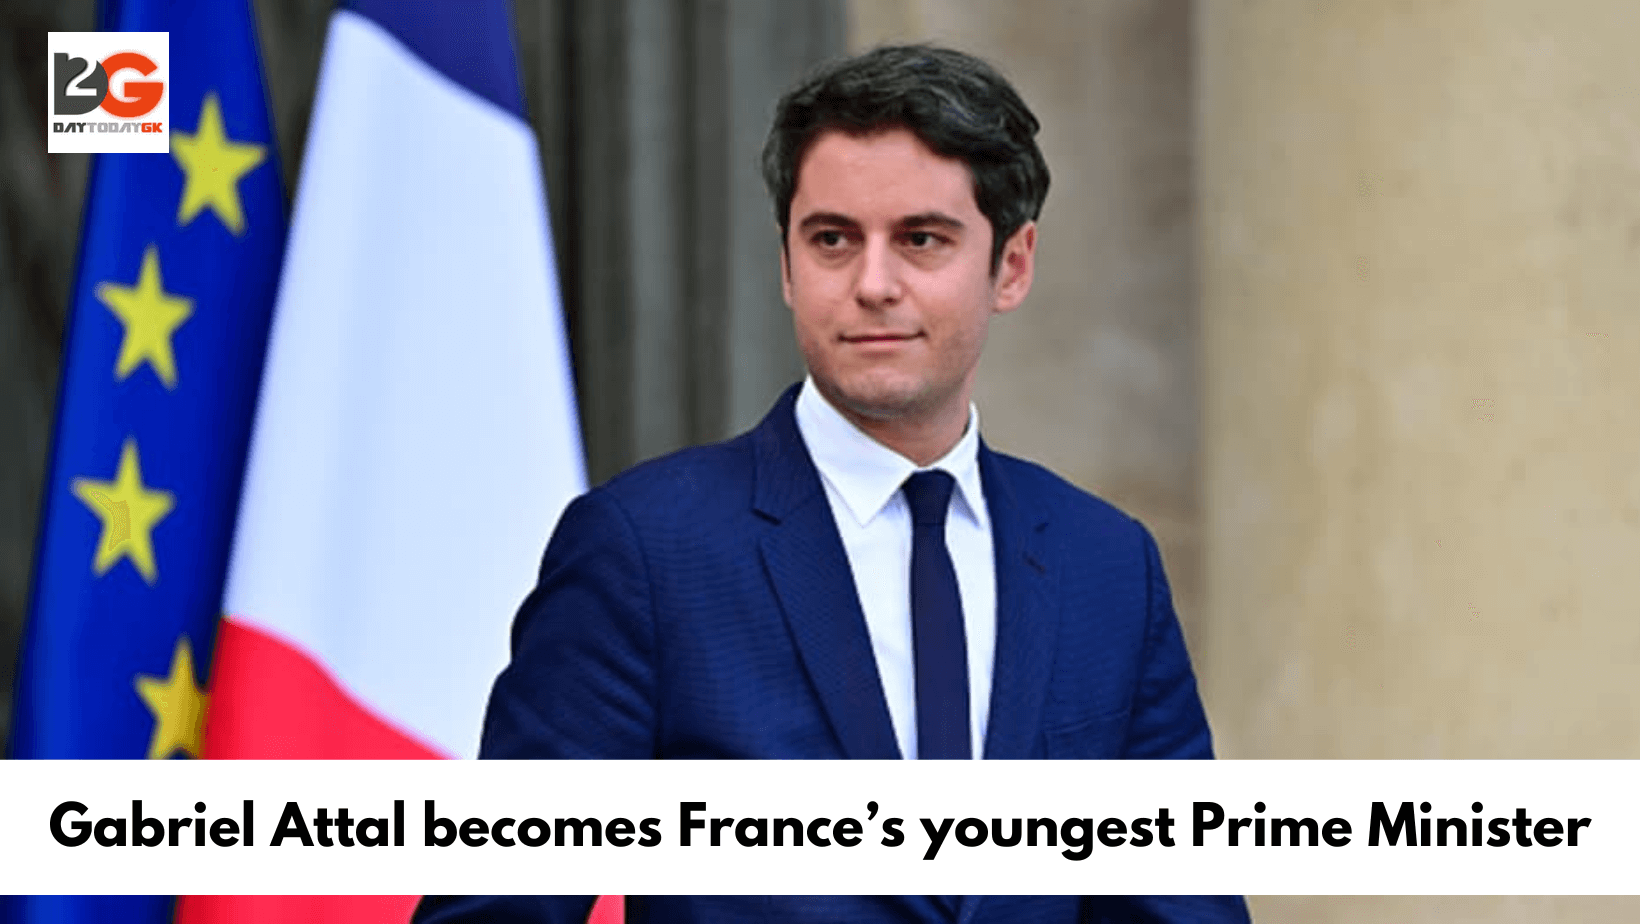 Gabriel Attal becomes France’s youngest Prime Minister